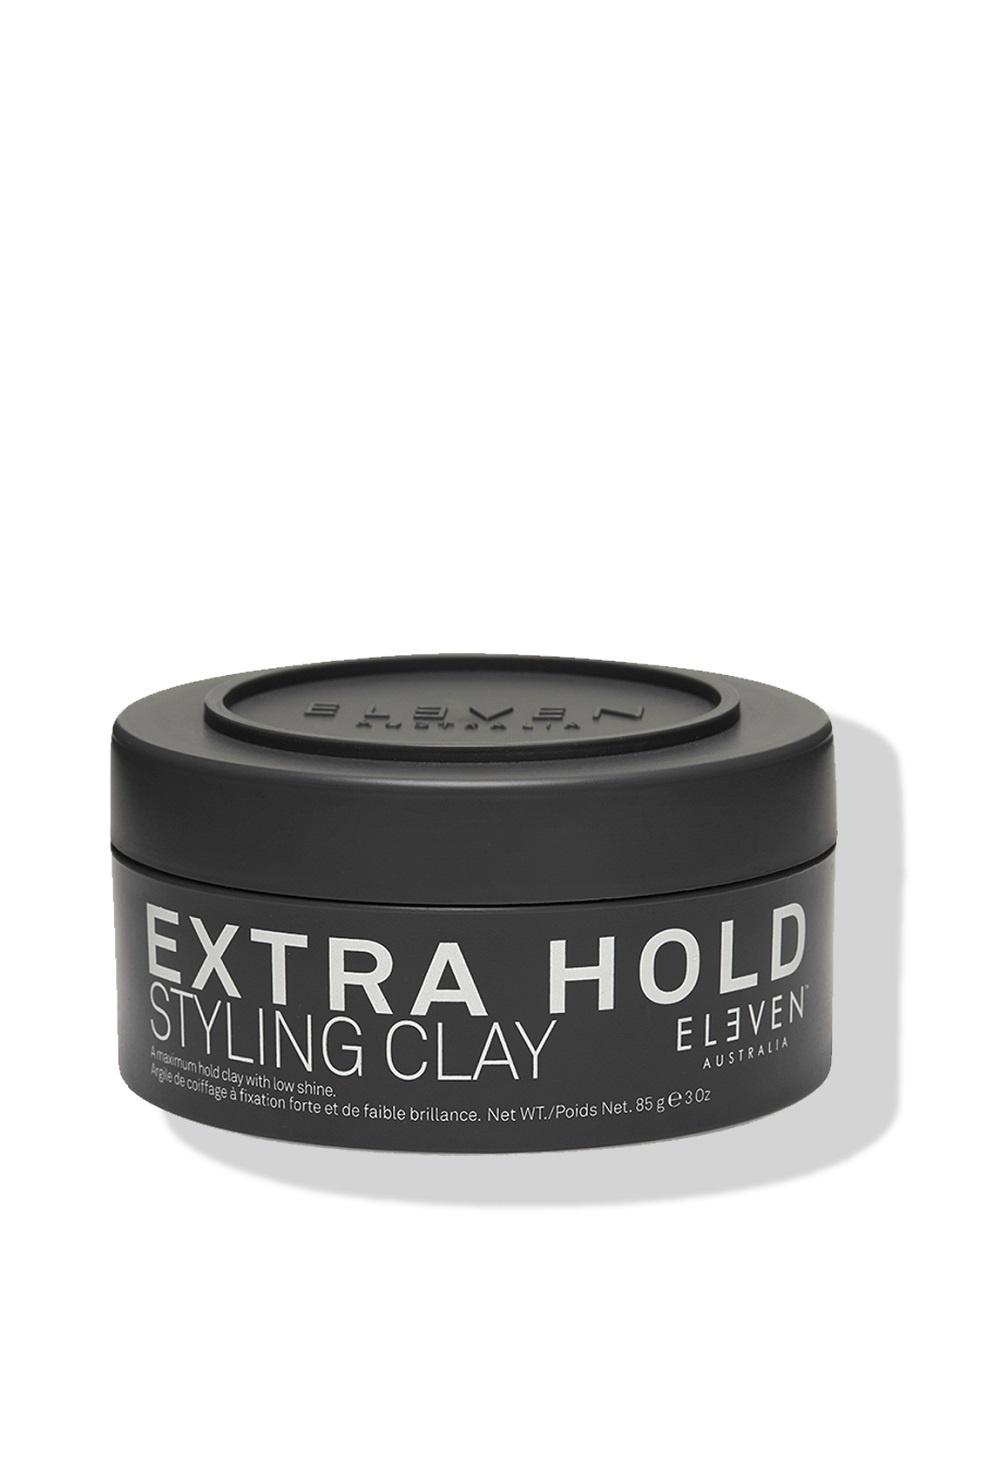 eleven australia extra hold styling clay 85g